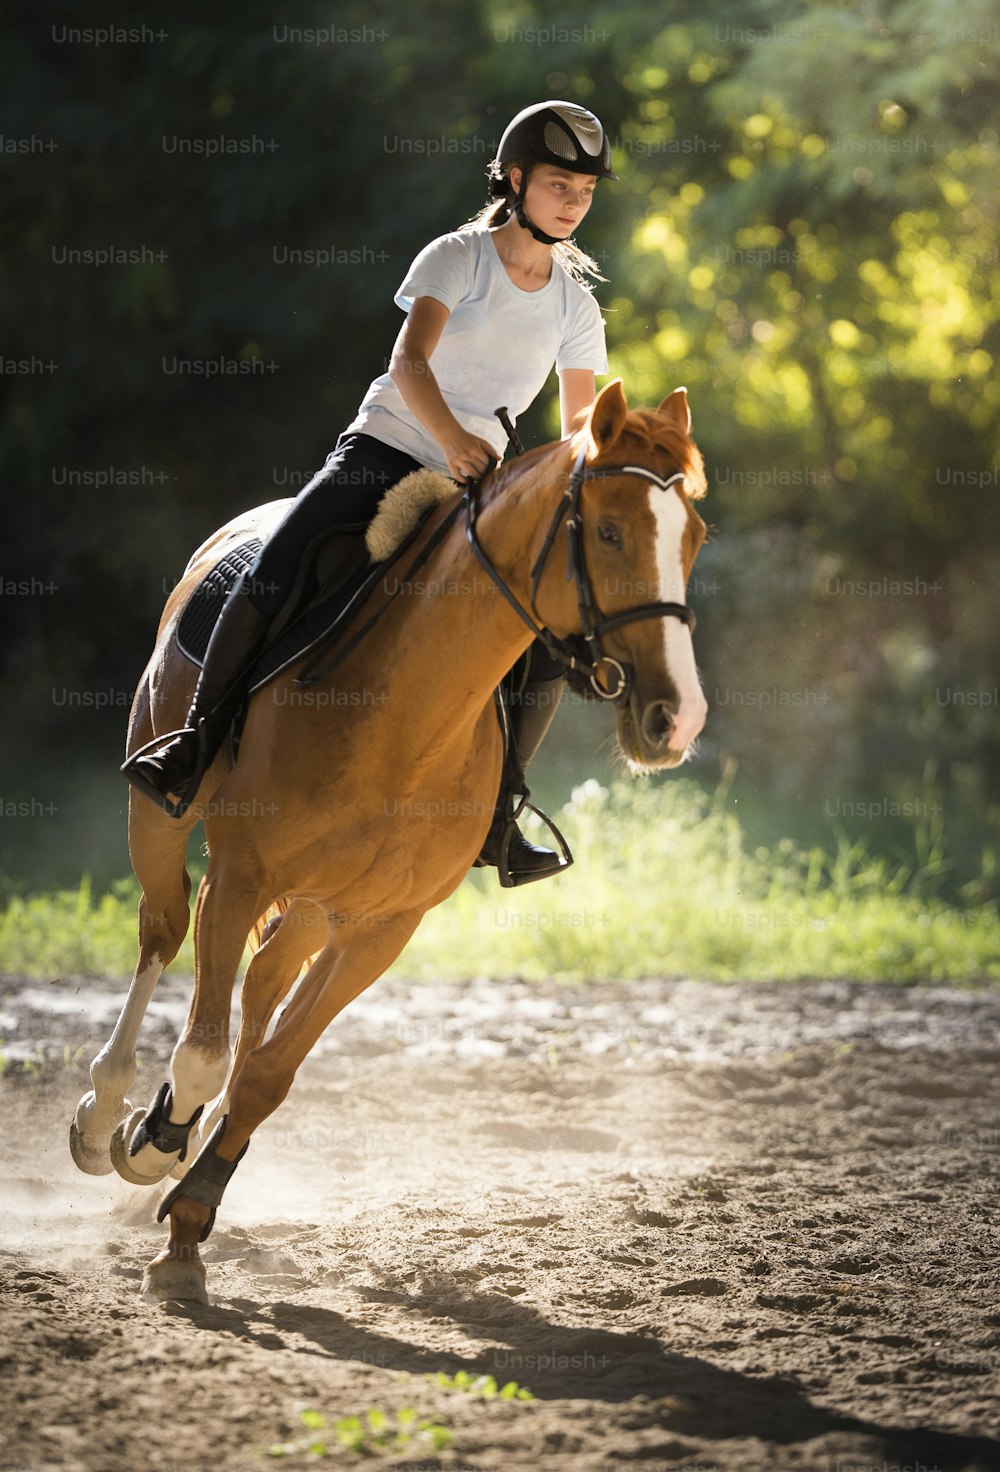 Young pretty girl riding a horse